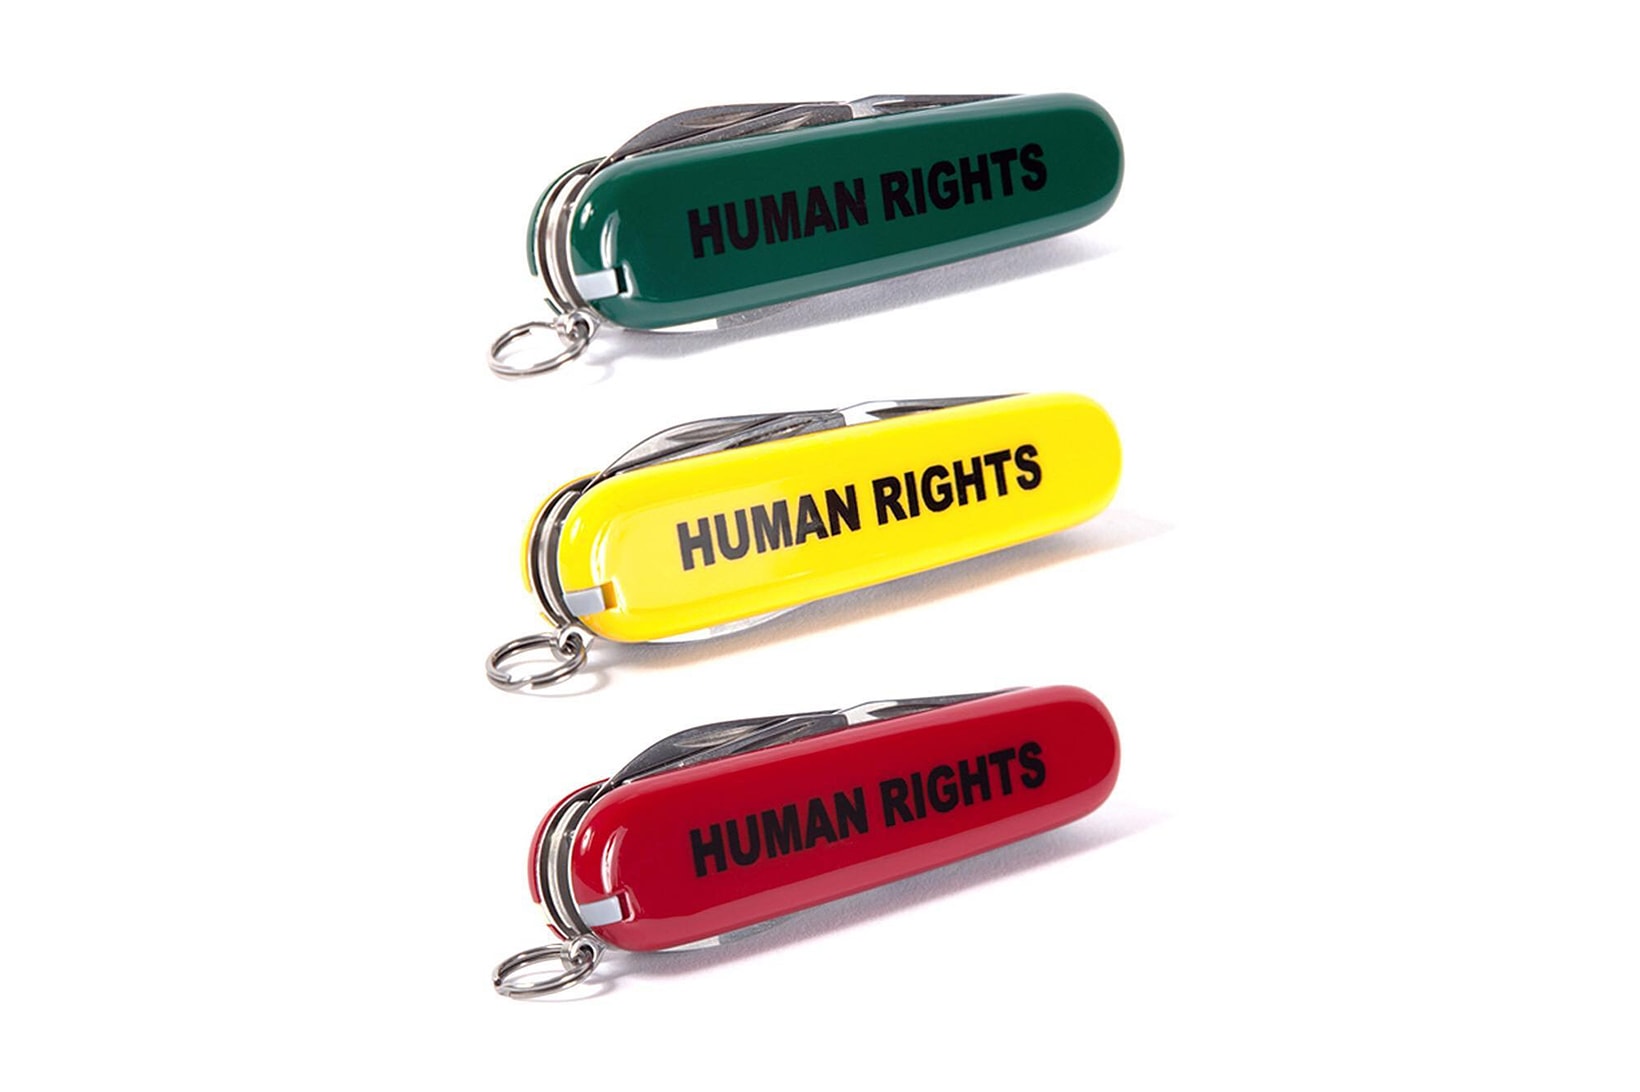 Noah HUMAN RIGHTS Pocket Knives Knife Green Yellow Red 2017 August 17 Thursday Release Date Info Charlottesville